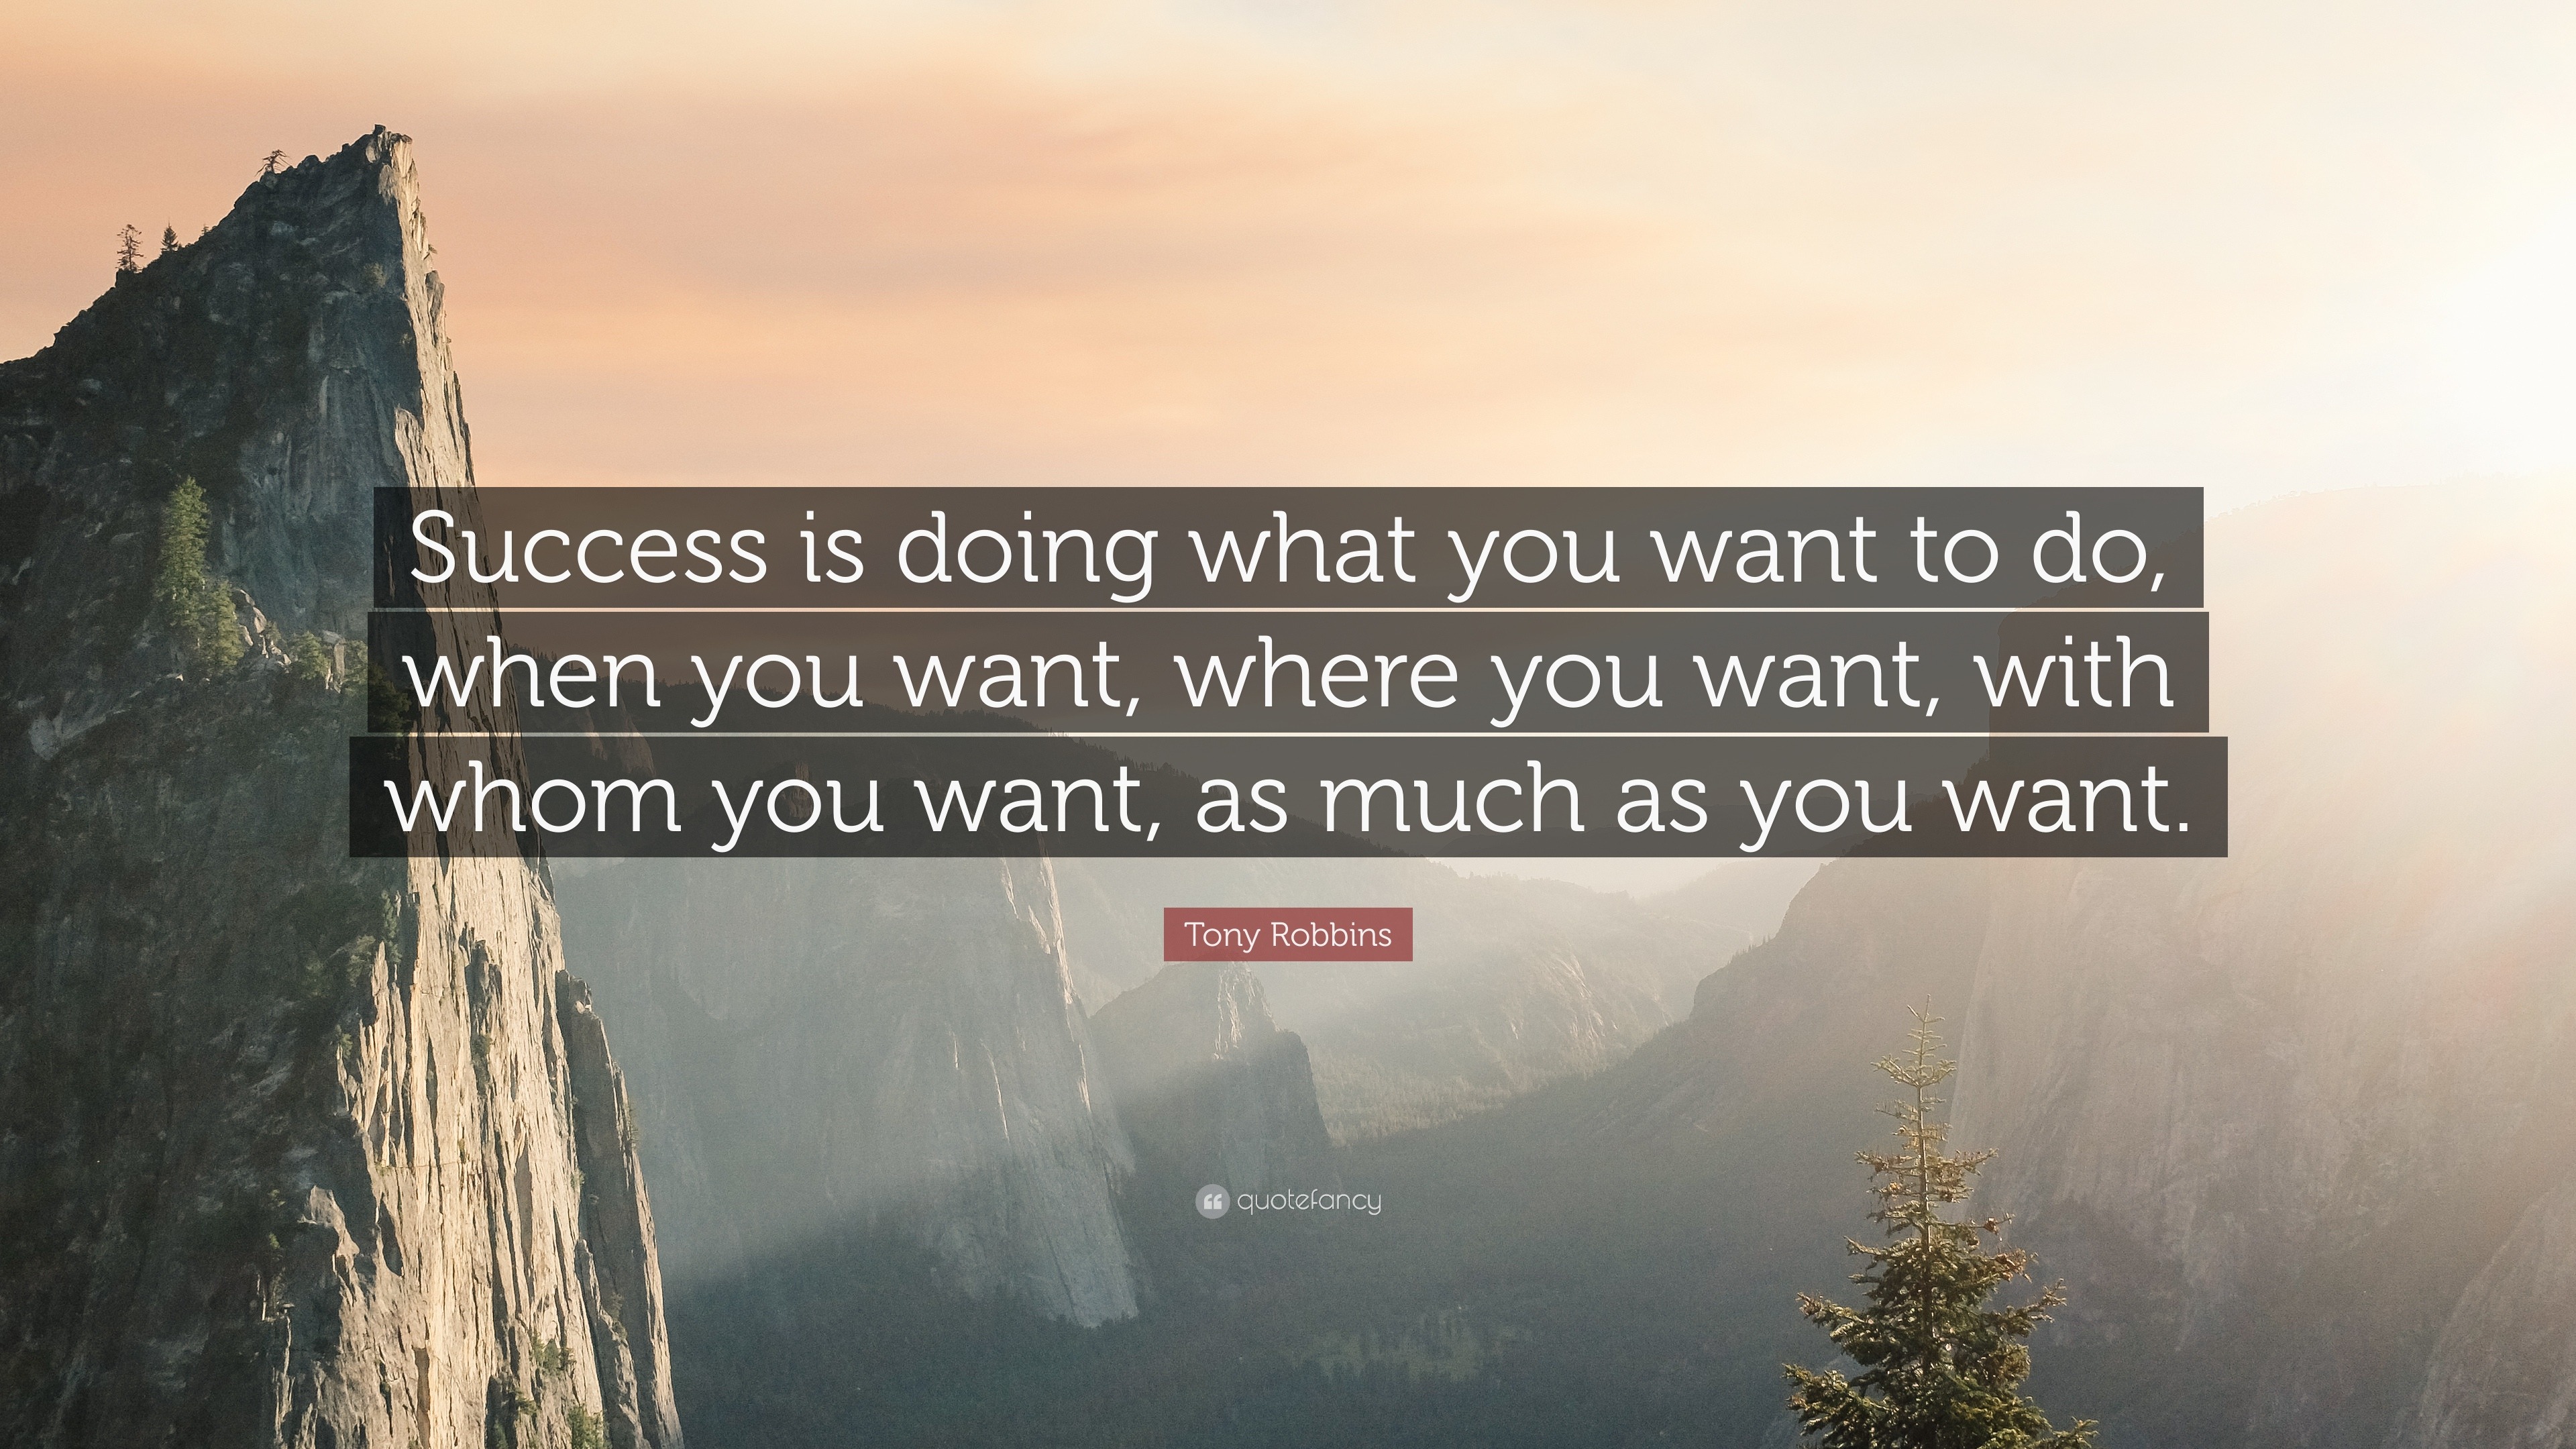 Tony Robbins Quote: “Success is doing what you want to do, when you ...